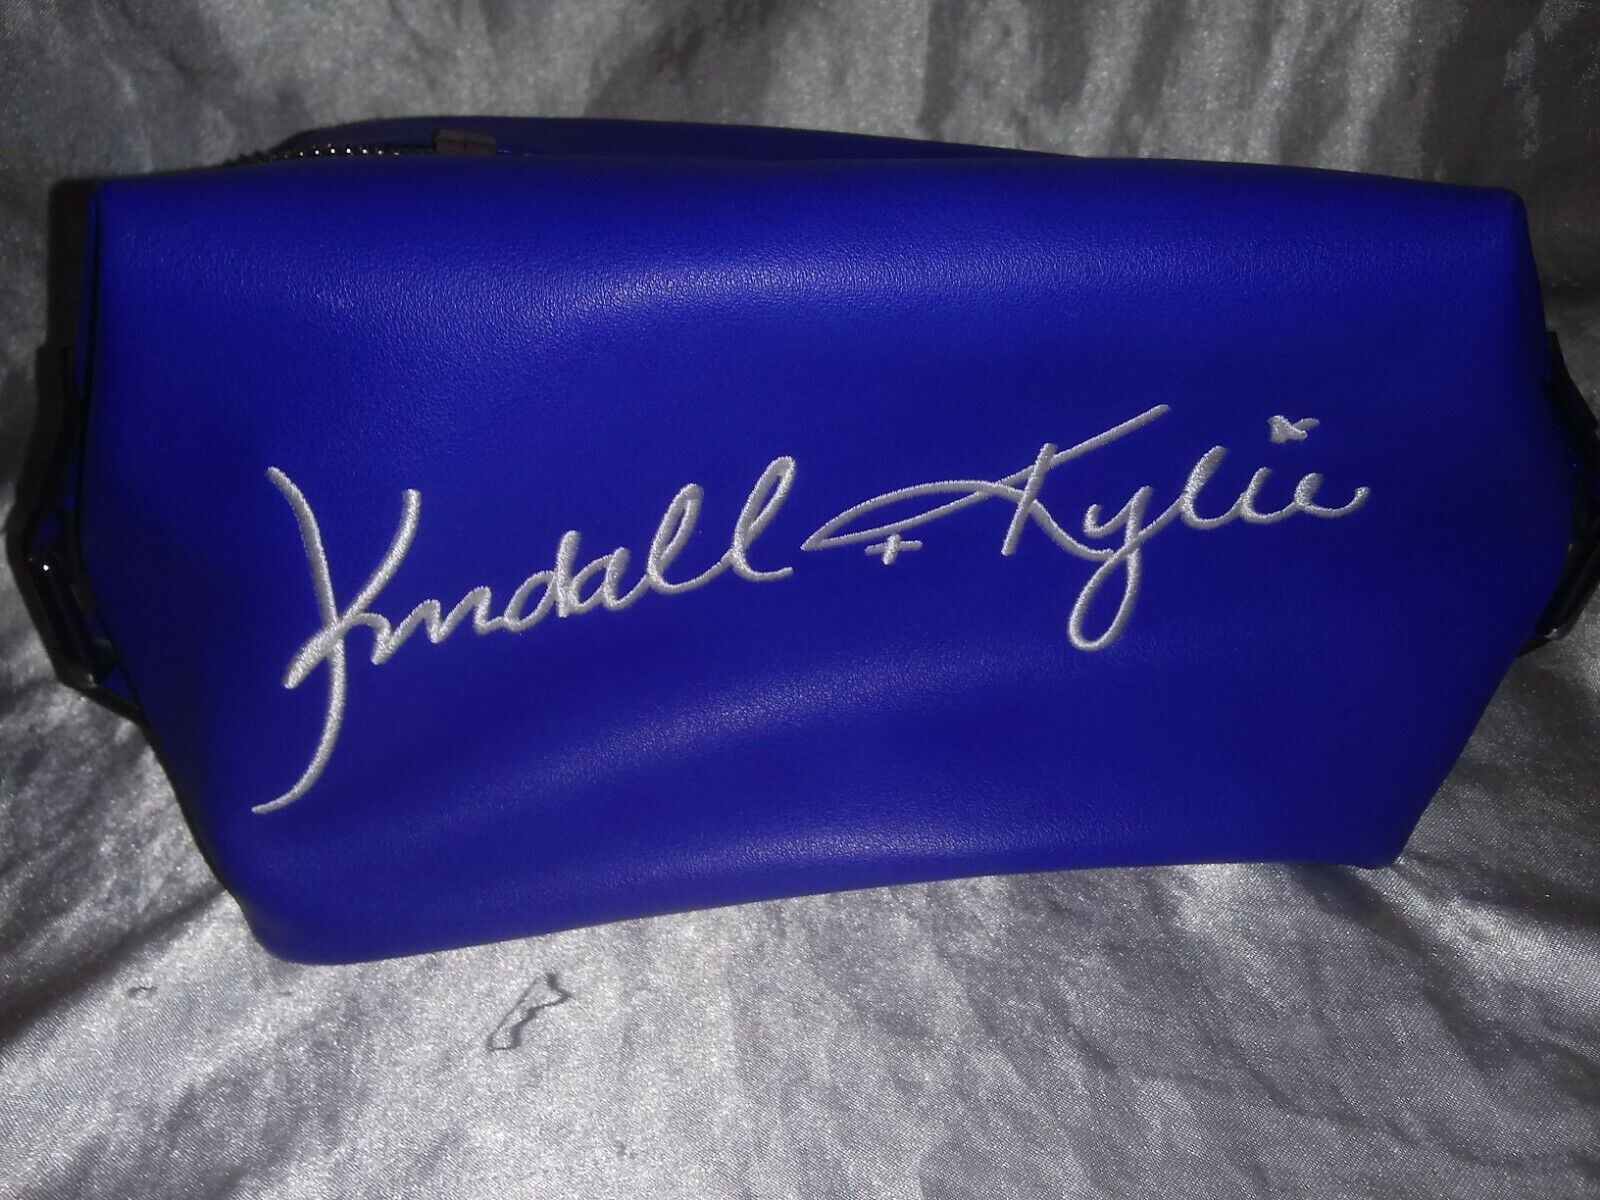 KENDALL & KYLIE JENNER BLUE WHITE TRAVEL MAKEUP BAG CASE SMALL